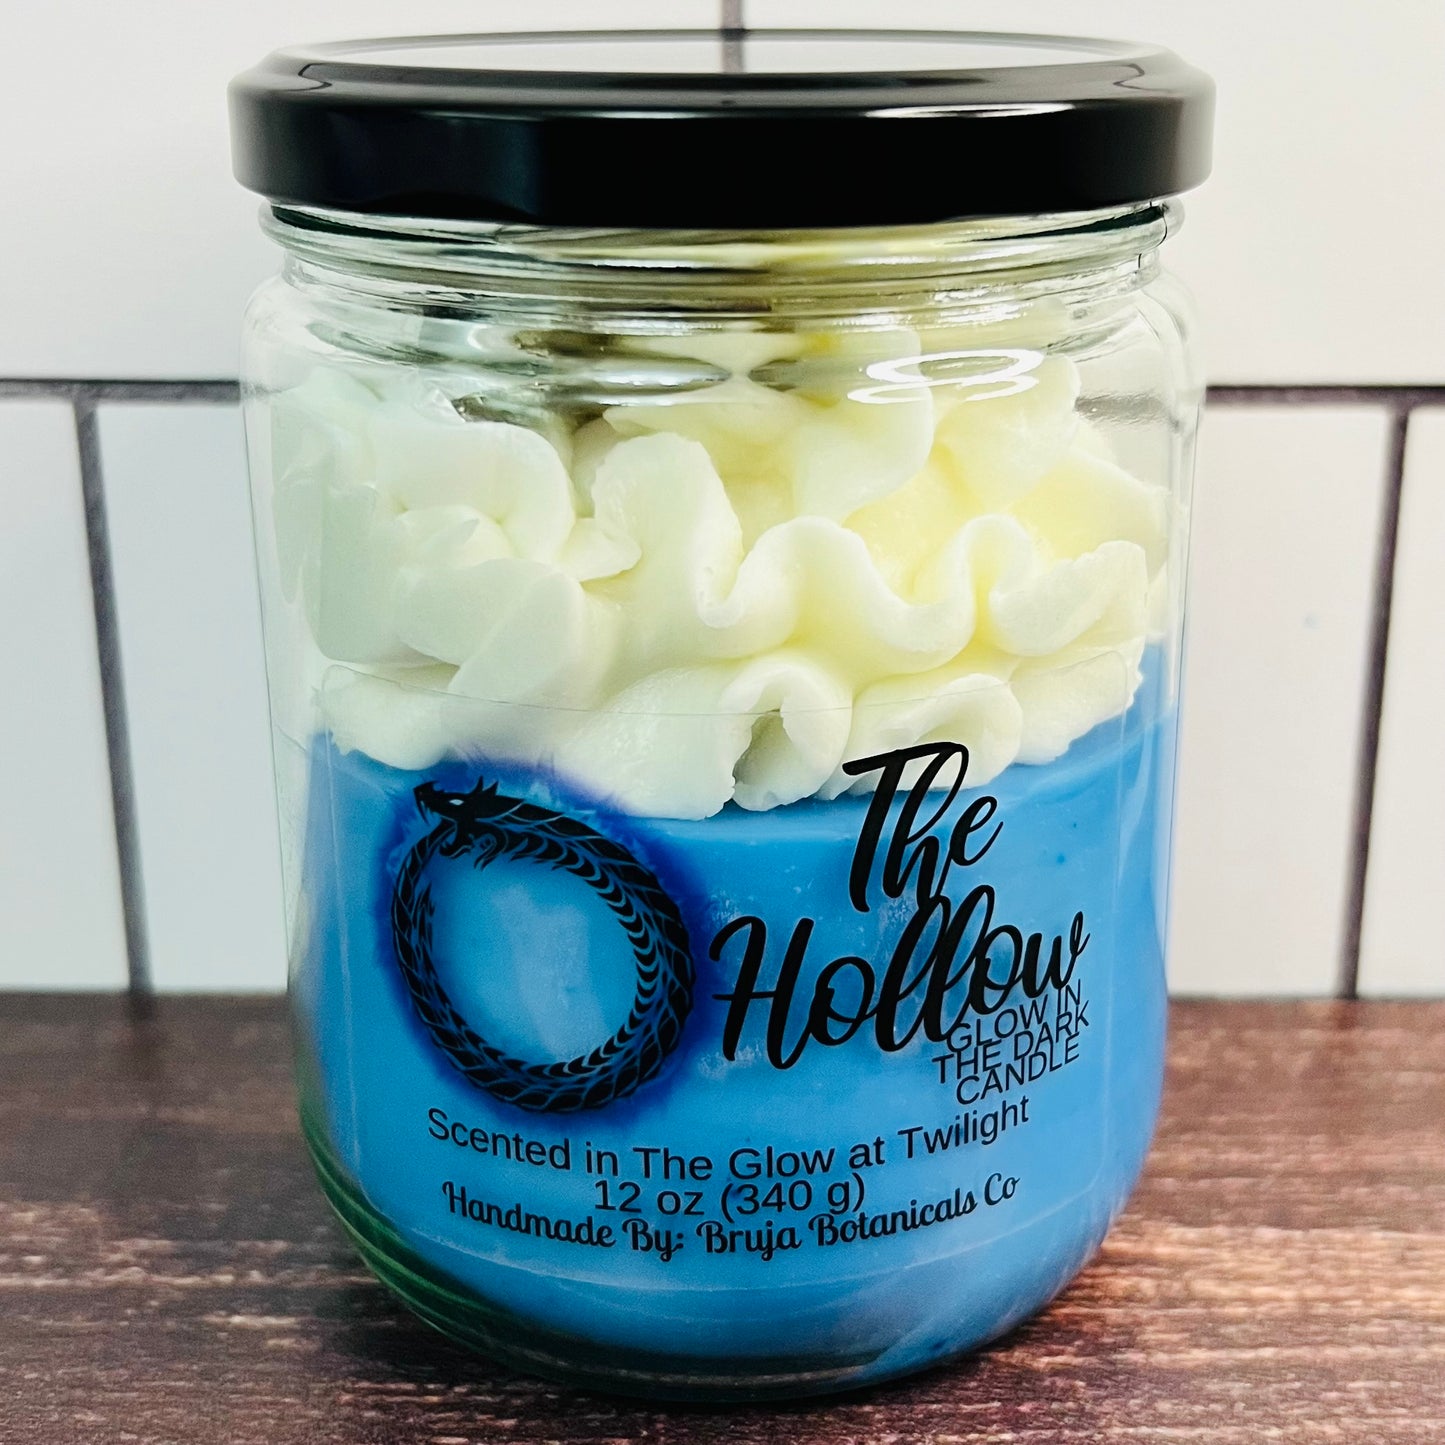 The Hollow Glow in the Dark Whipped Candle (TVD inspired / Limited Edition)